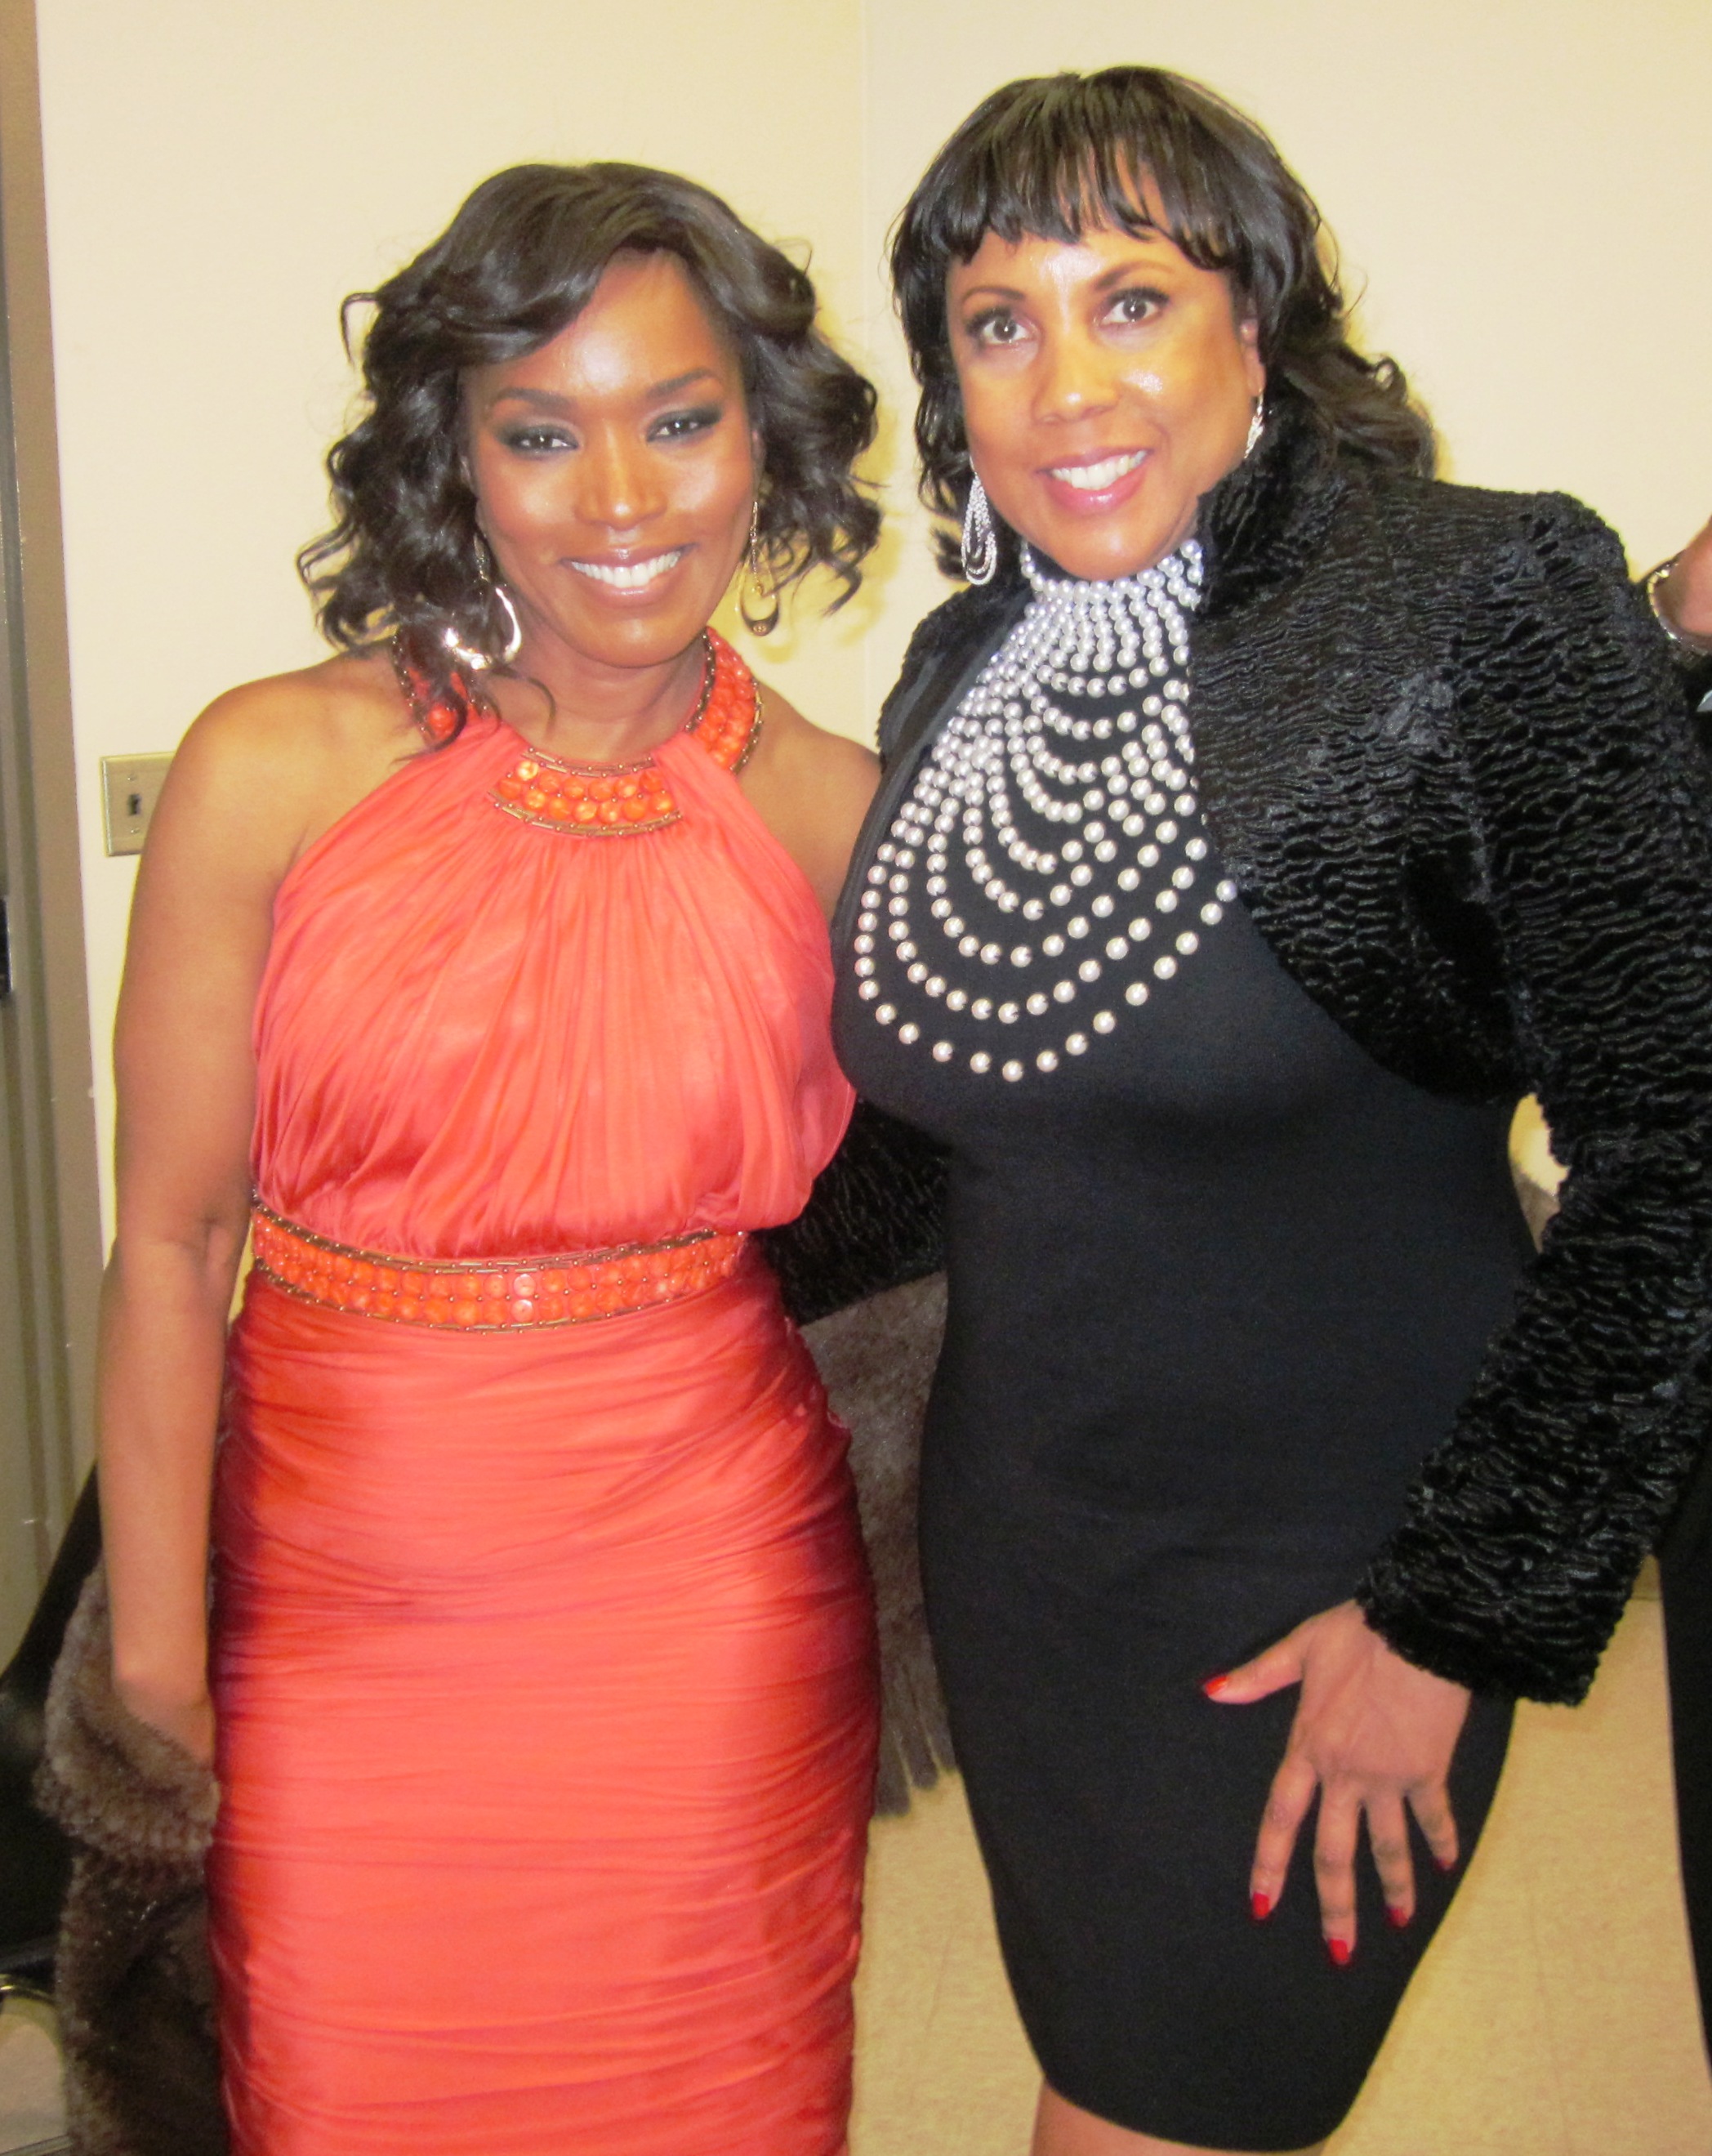 Actress Angela Bassett recently honored by Essence Magazine and Assemblymember Mike Davis.